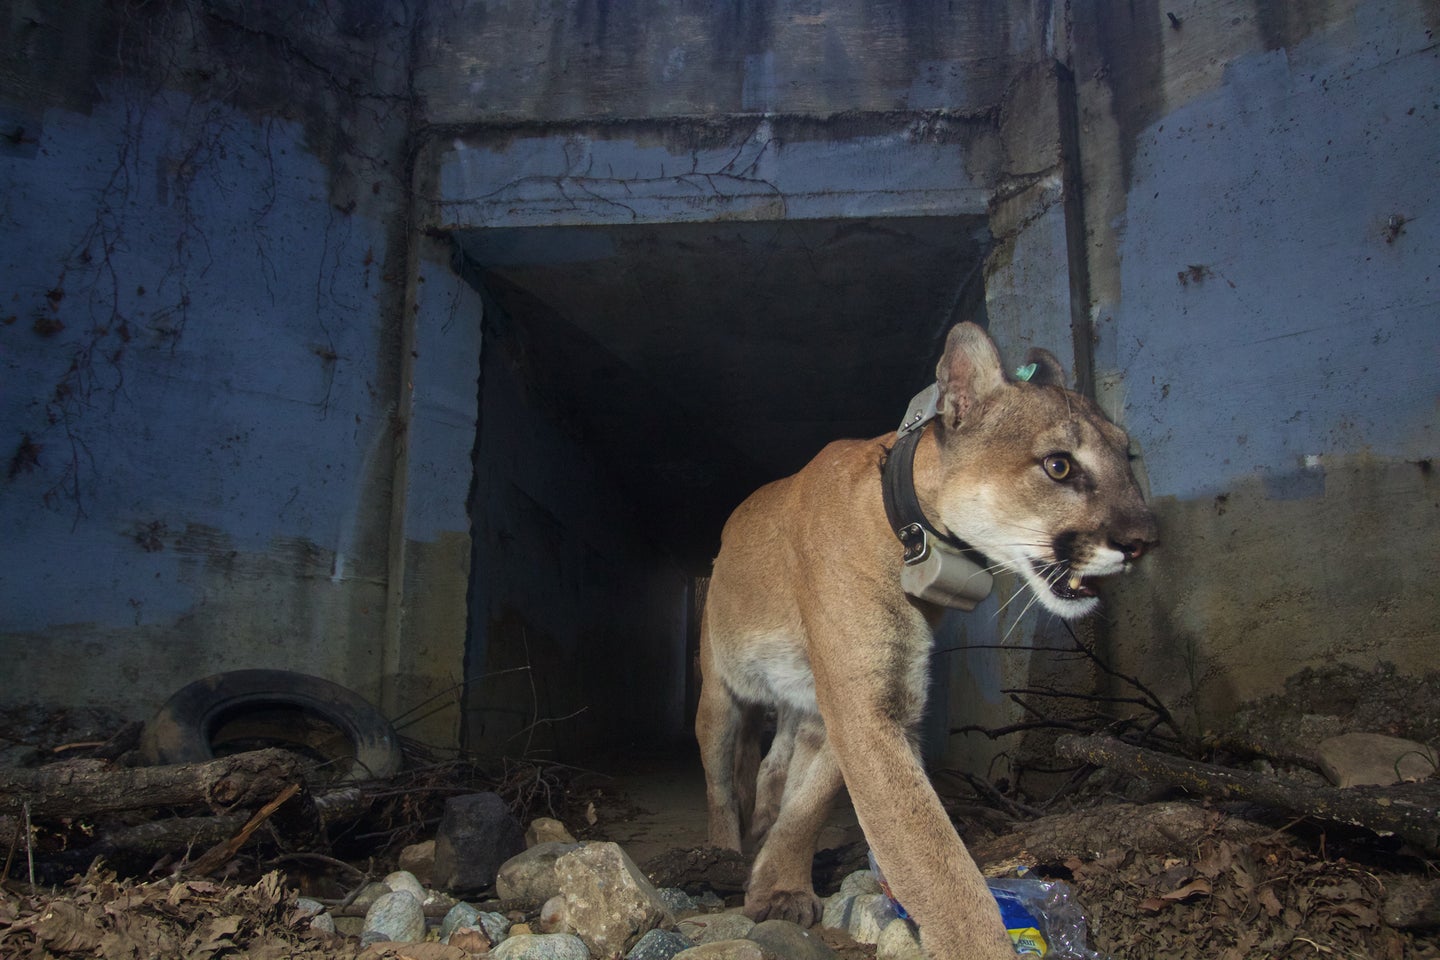 A mountain lion uses an underpass to avoid crossing a road in Los Angeles.